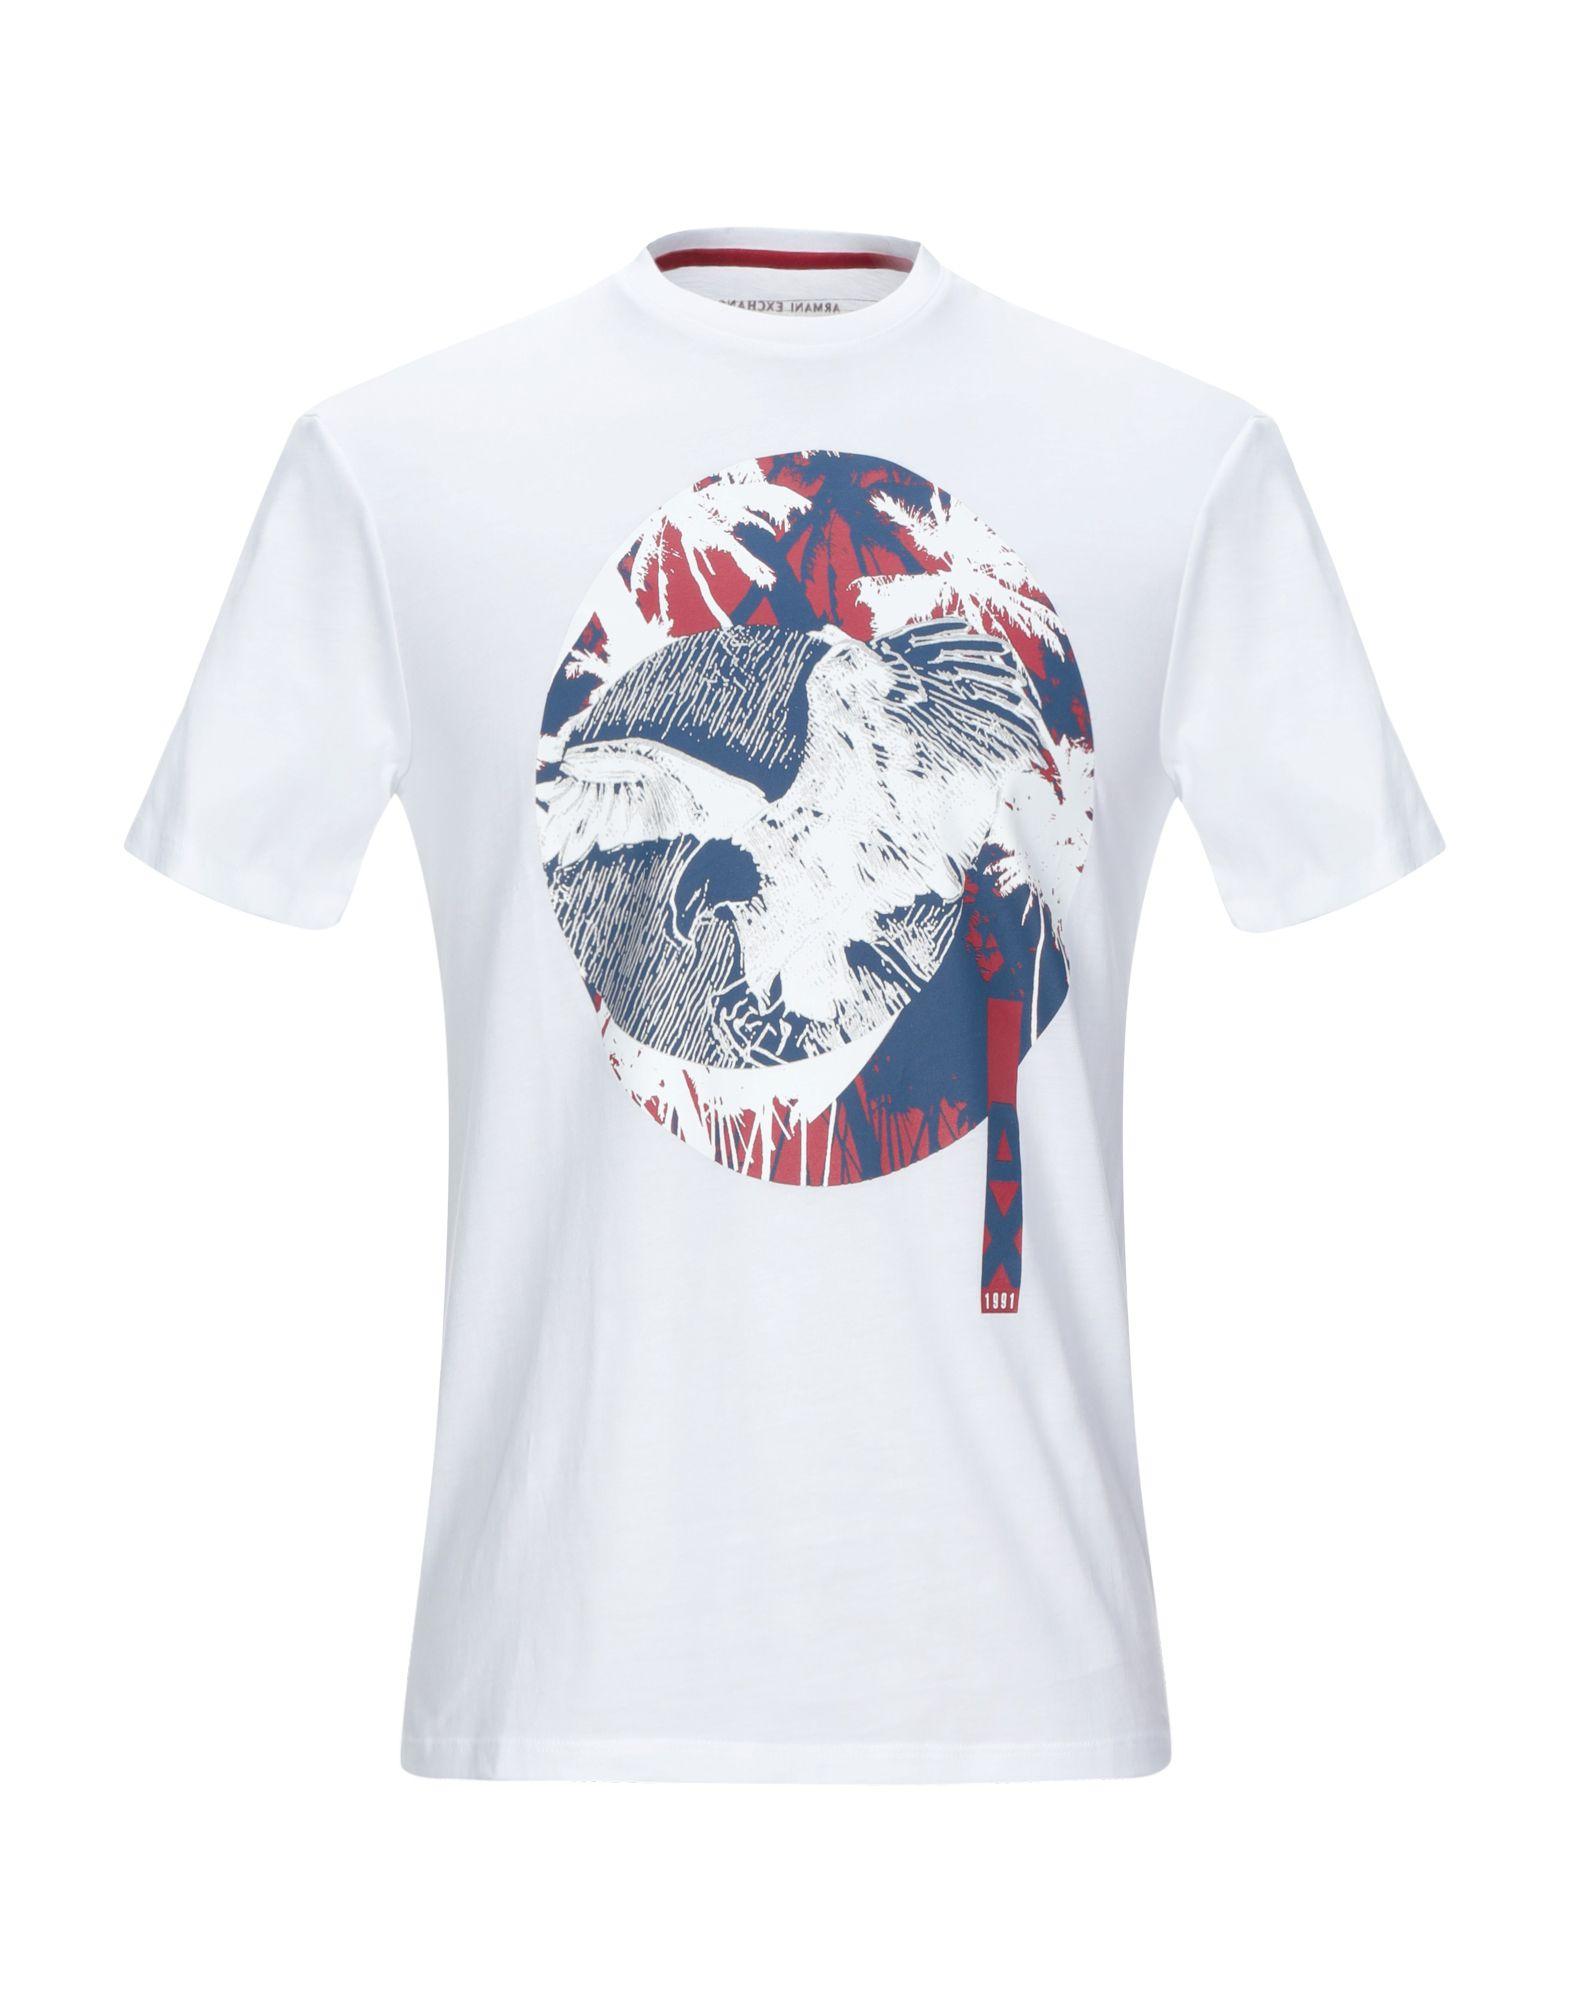 Armani Exchange T-shirt in White for Men - Lyst